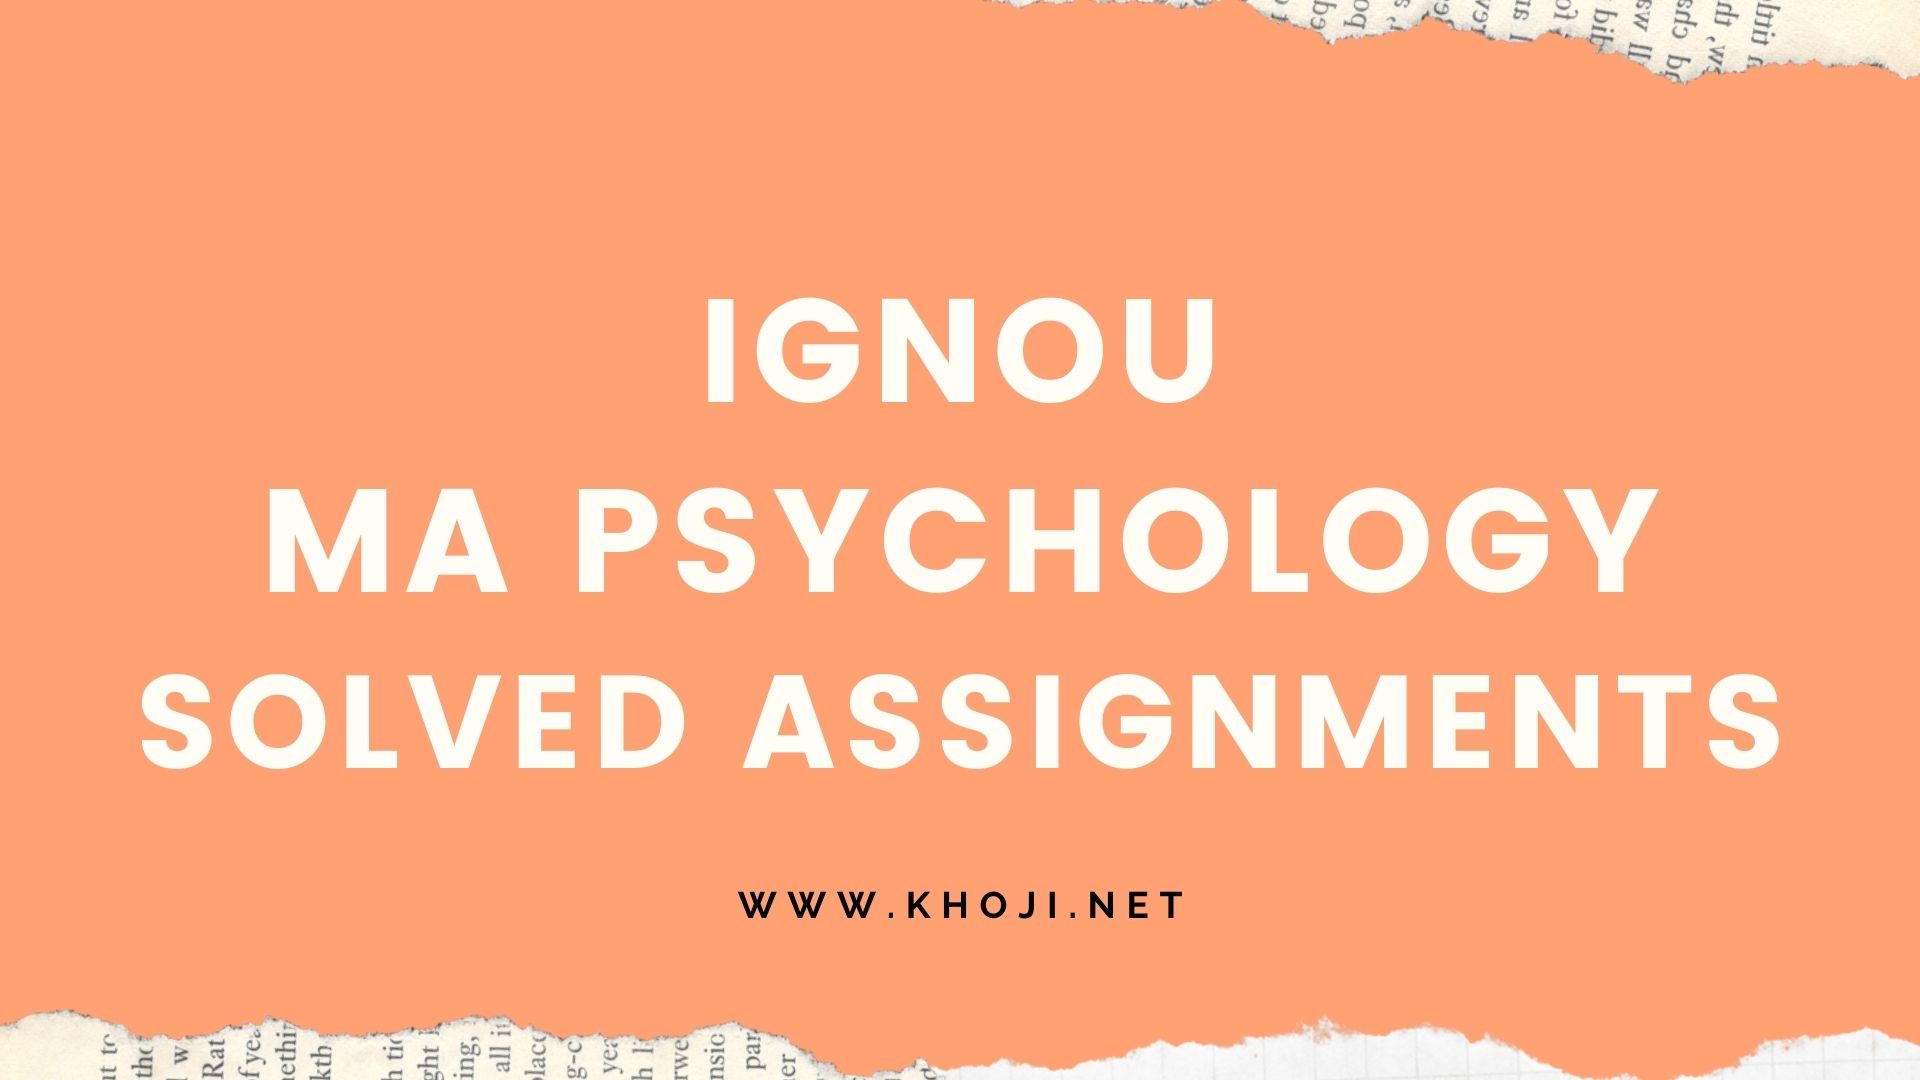 IGNOU MA Psychology Solved Assignments